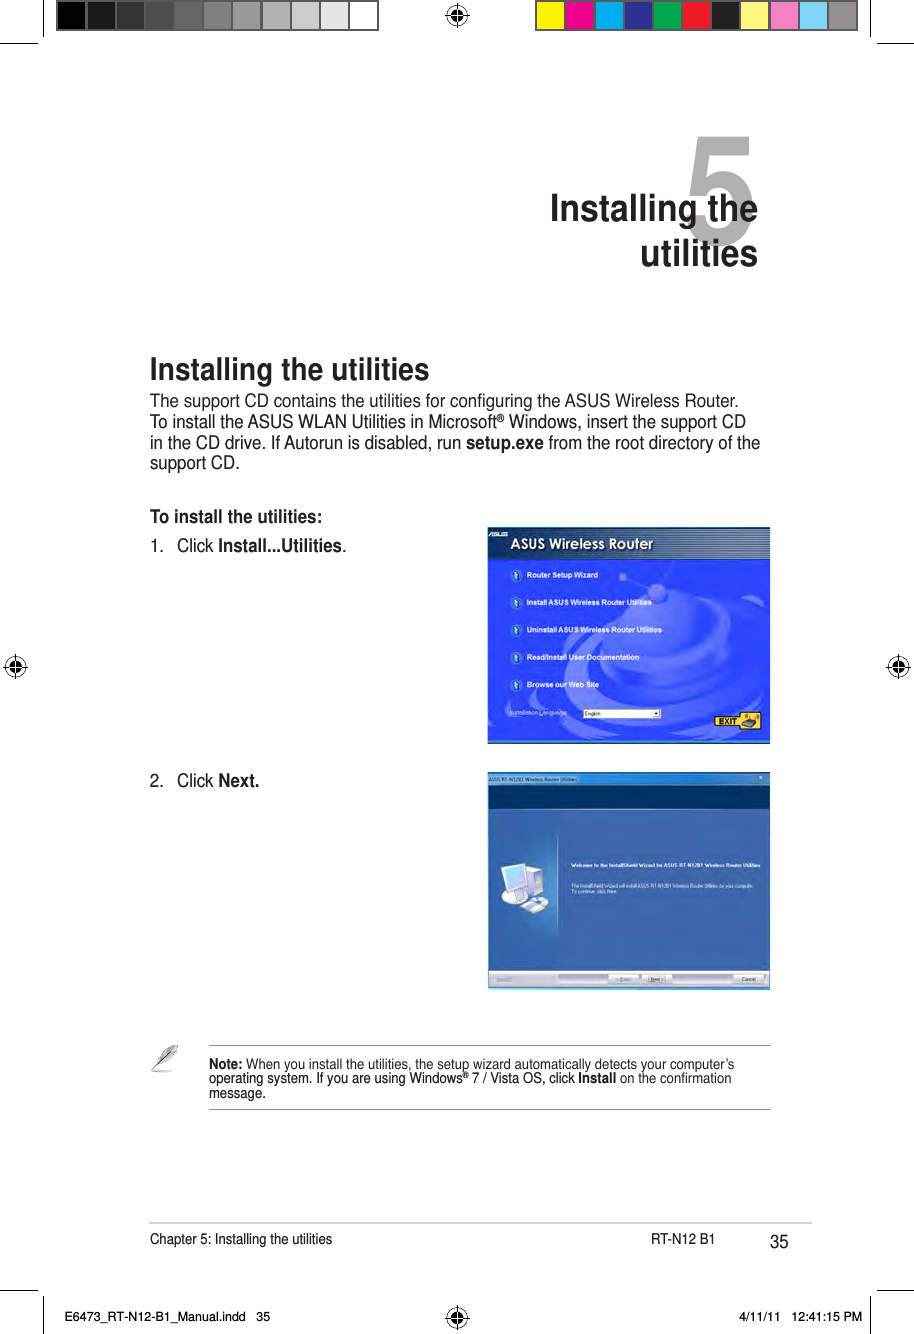 35Chapter 5: Installing the utilities                      RT-N12 B15Installing the  utilities2.  Click Next.Installing the utilitiesThe support CD contains the utilities for conguring the ASUS Wireless Router. To install the ASUS WLAN Utilities in Microsoft® Windows, insert the support CD in the CD drive. If Autorun is disabled, run setup.exe from the root directory of the support CD.To install the utilities: 1.  Click Install...Utilities.Note: When you install the utilities, the setup wizard automatically detects your computer’s operating system. If you are using Windows® 7 / Vista OS, click Install on the conrmation message.E6473_RT-N12-B1_Manual.indd   35 4/11/11   12:41:15 PM